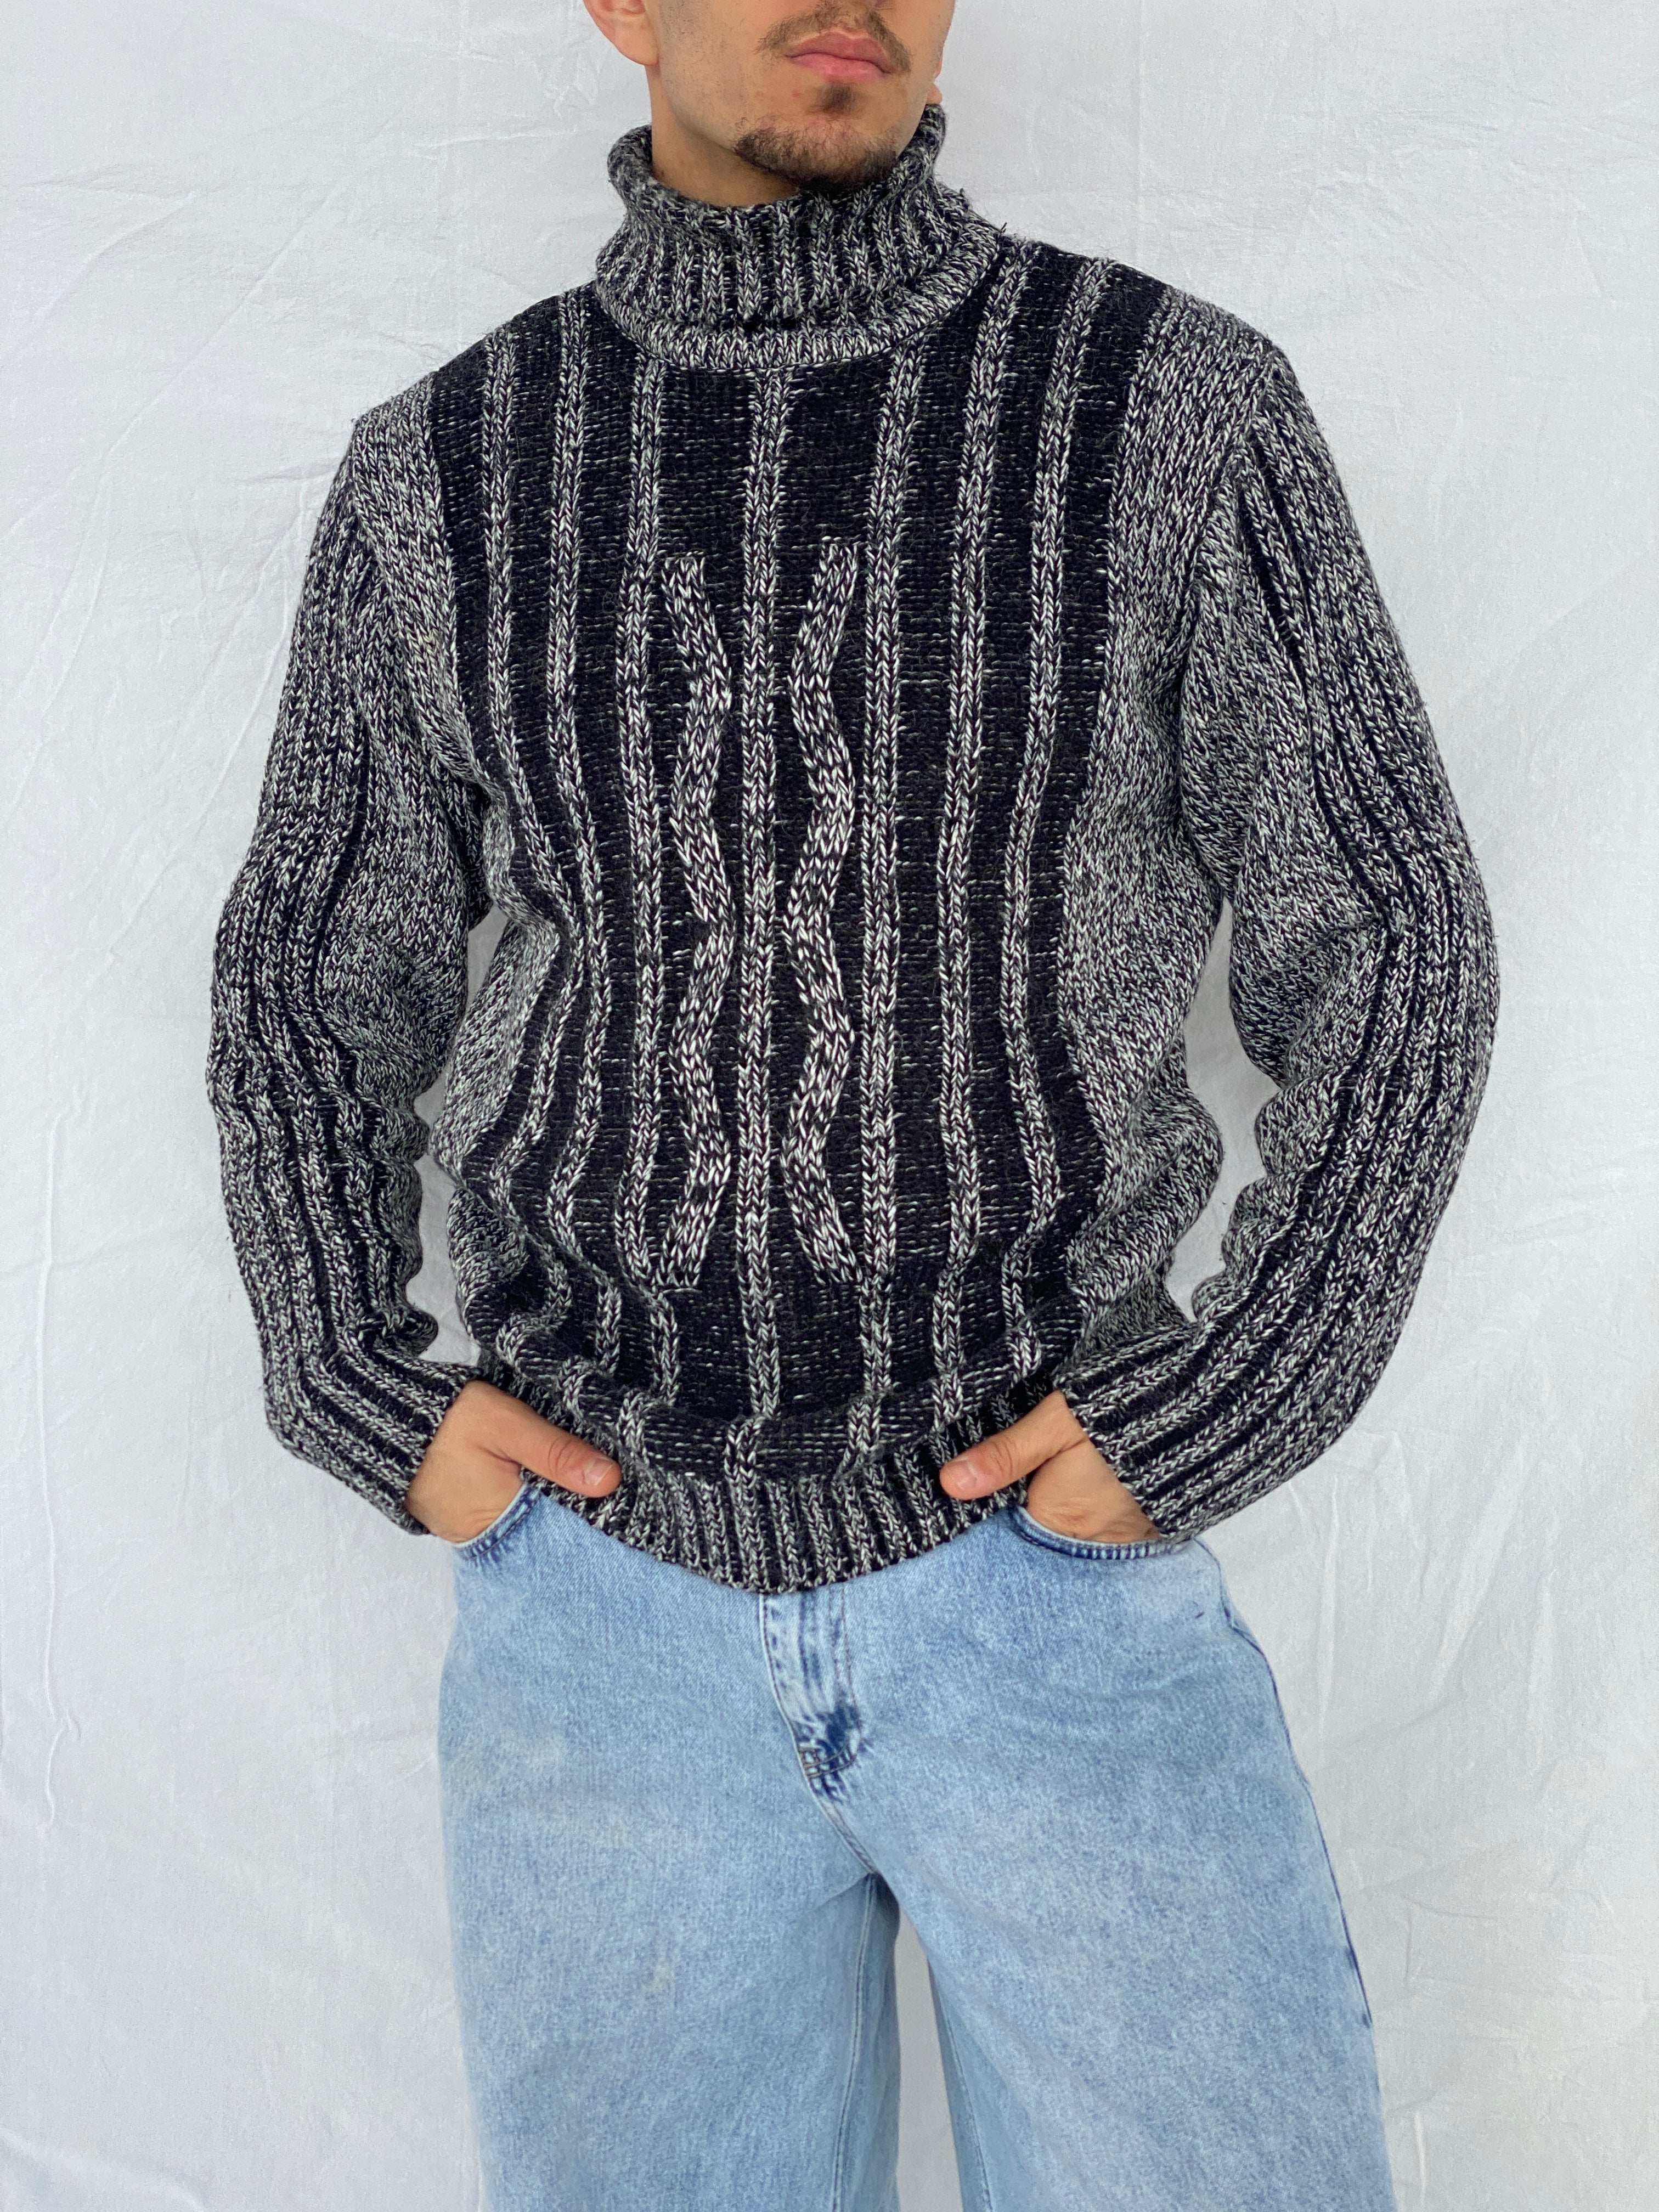 Vintage Almone Fore High Neck Grey Sweater - Balagan Vintage Sweater 80s, 90s, Abdullah, knitted sweater, winter